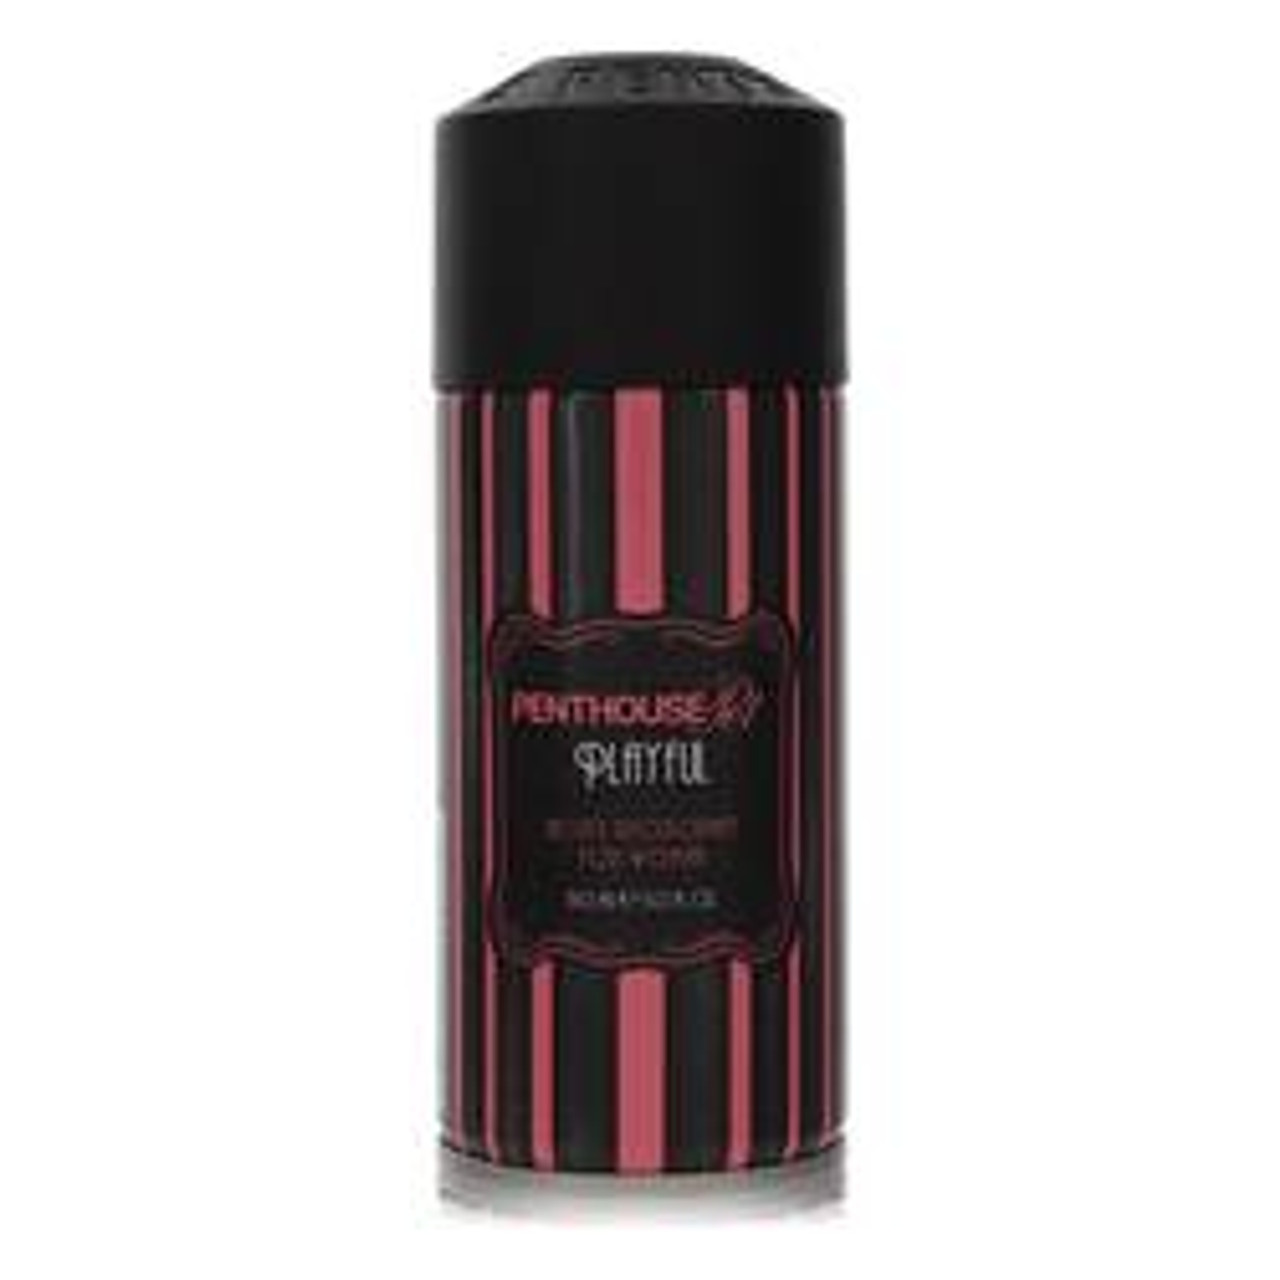 Penthouse Playful Perfume By Penthouse Deodorant Spray 5 oz for Women - [From 23.00 - Choose pk Qty ] - *Ships from Miami